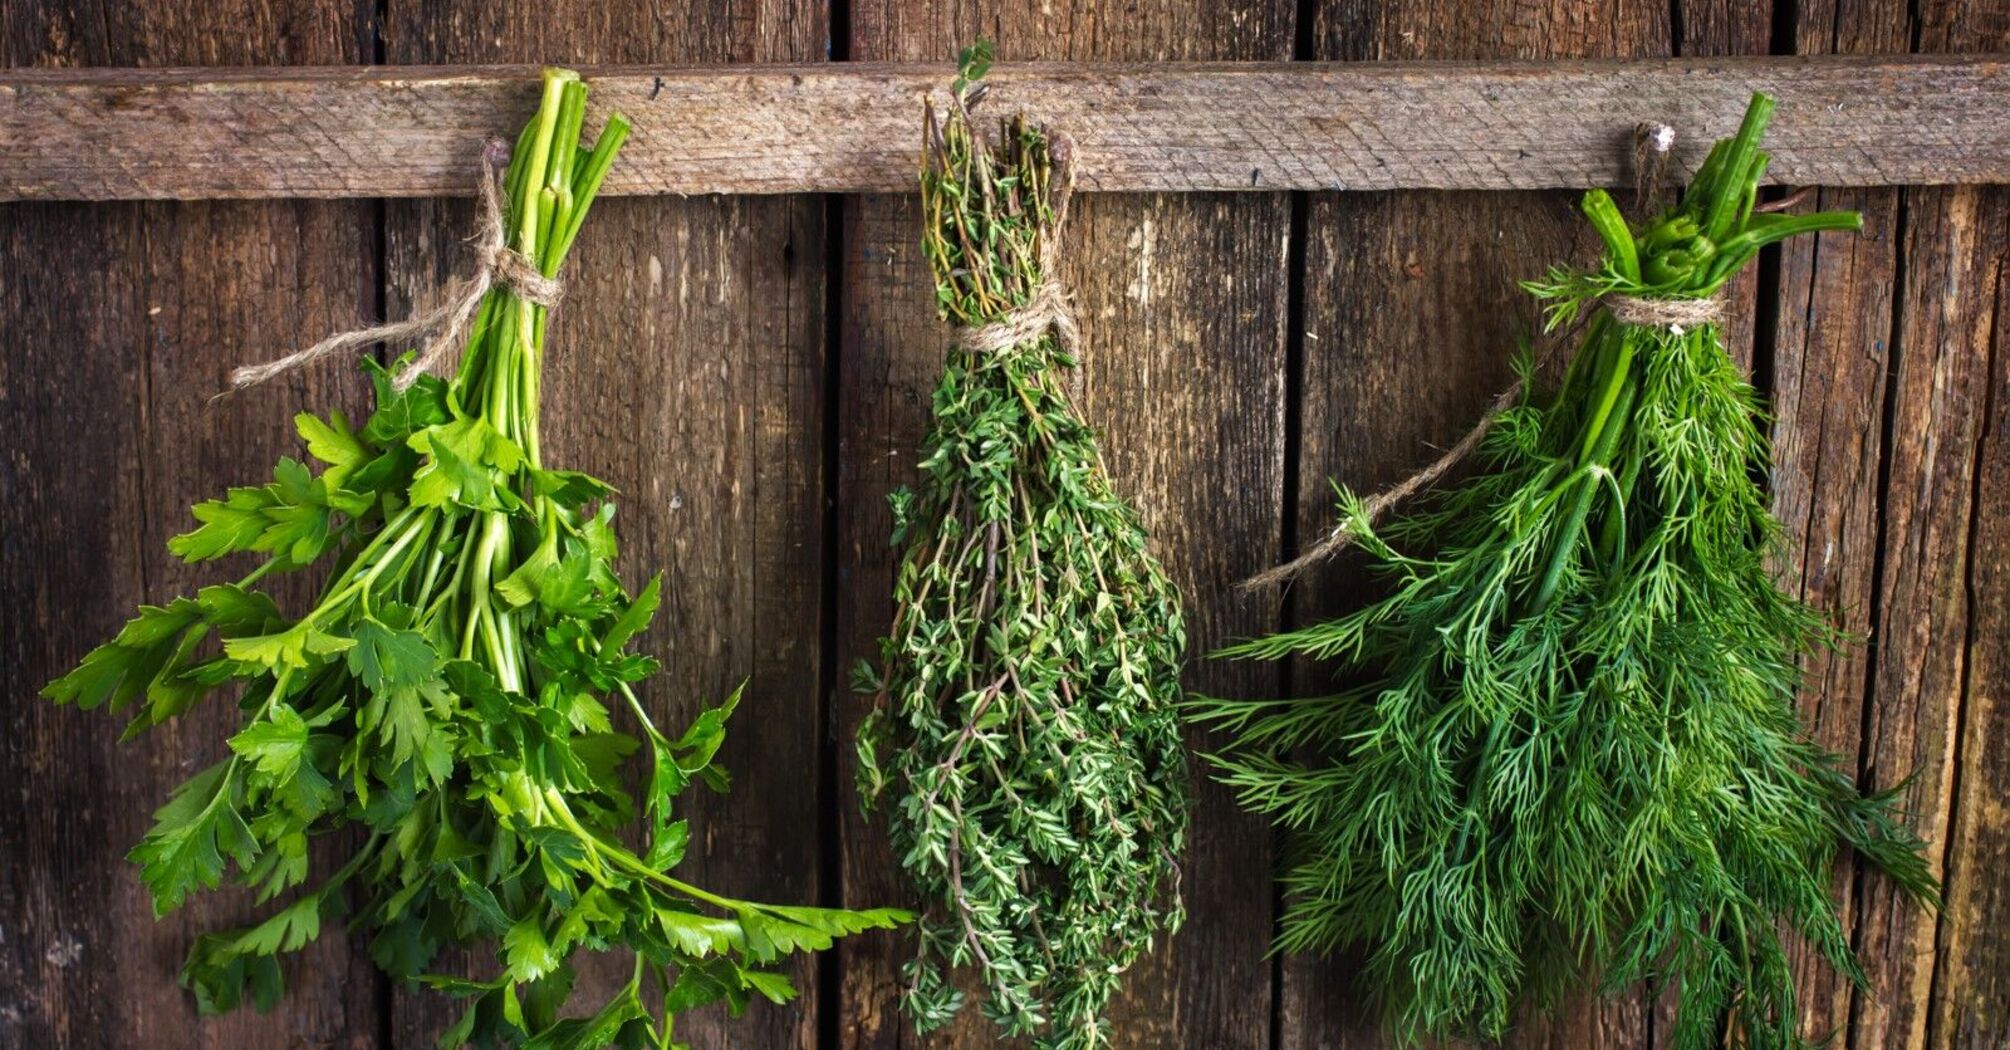 Why you should hang dill over your door